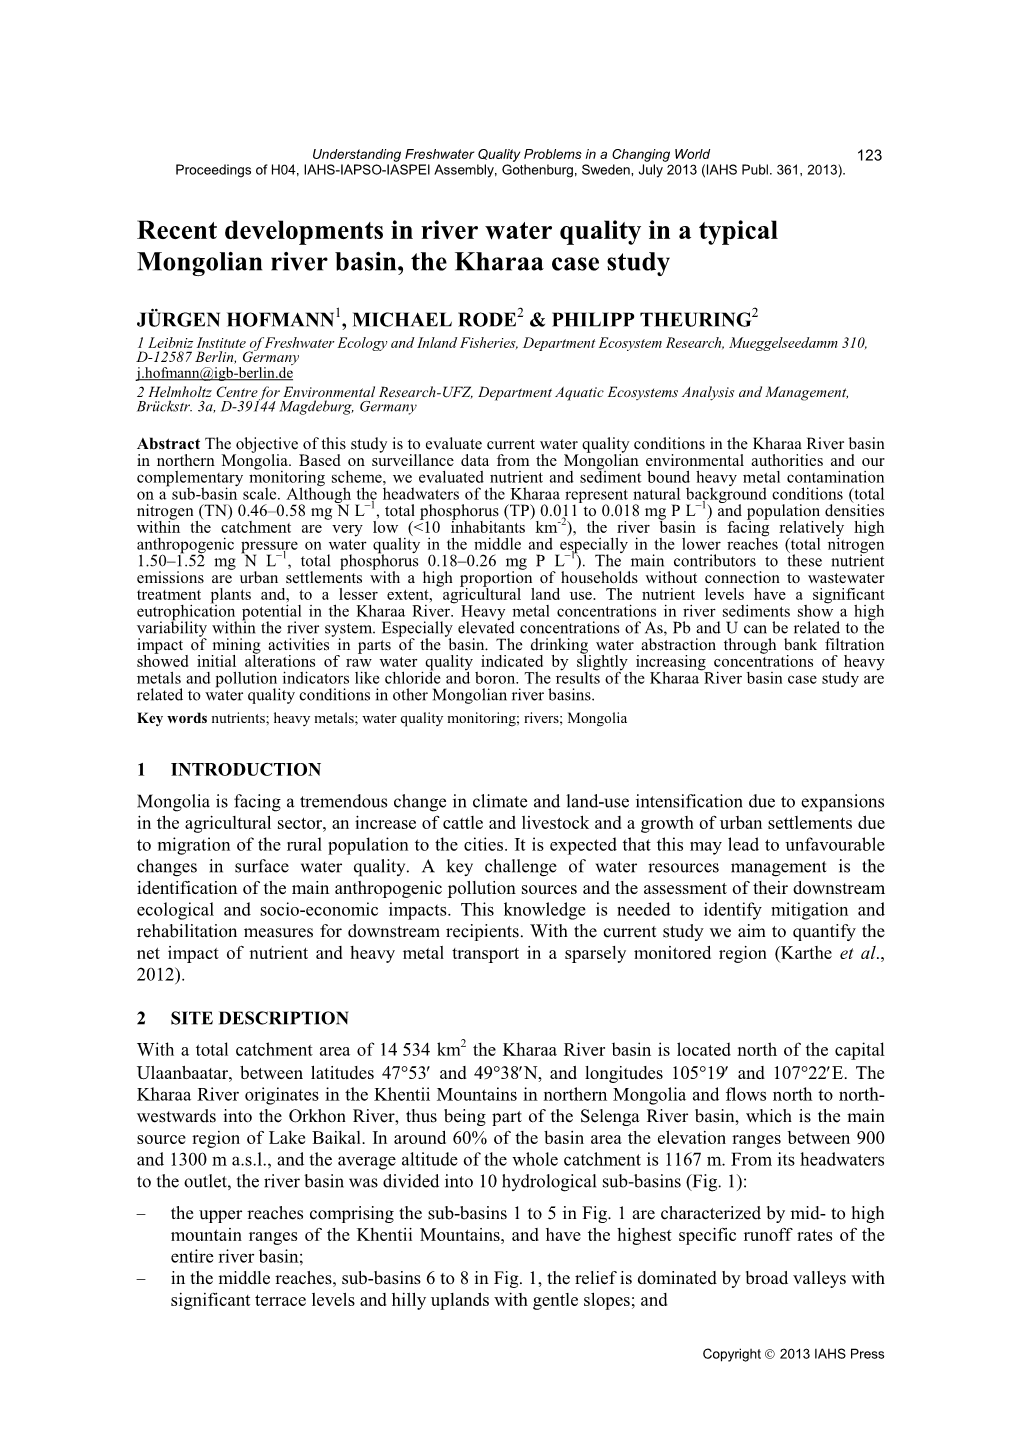 Recent Developments in River Water Quality in a Typical Mongolian River Basin, the Kharaa Case Study